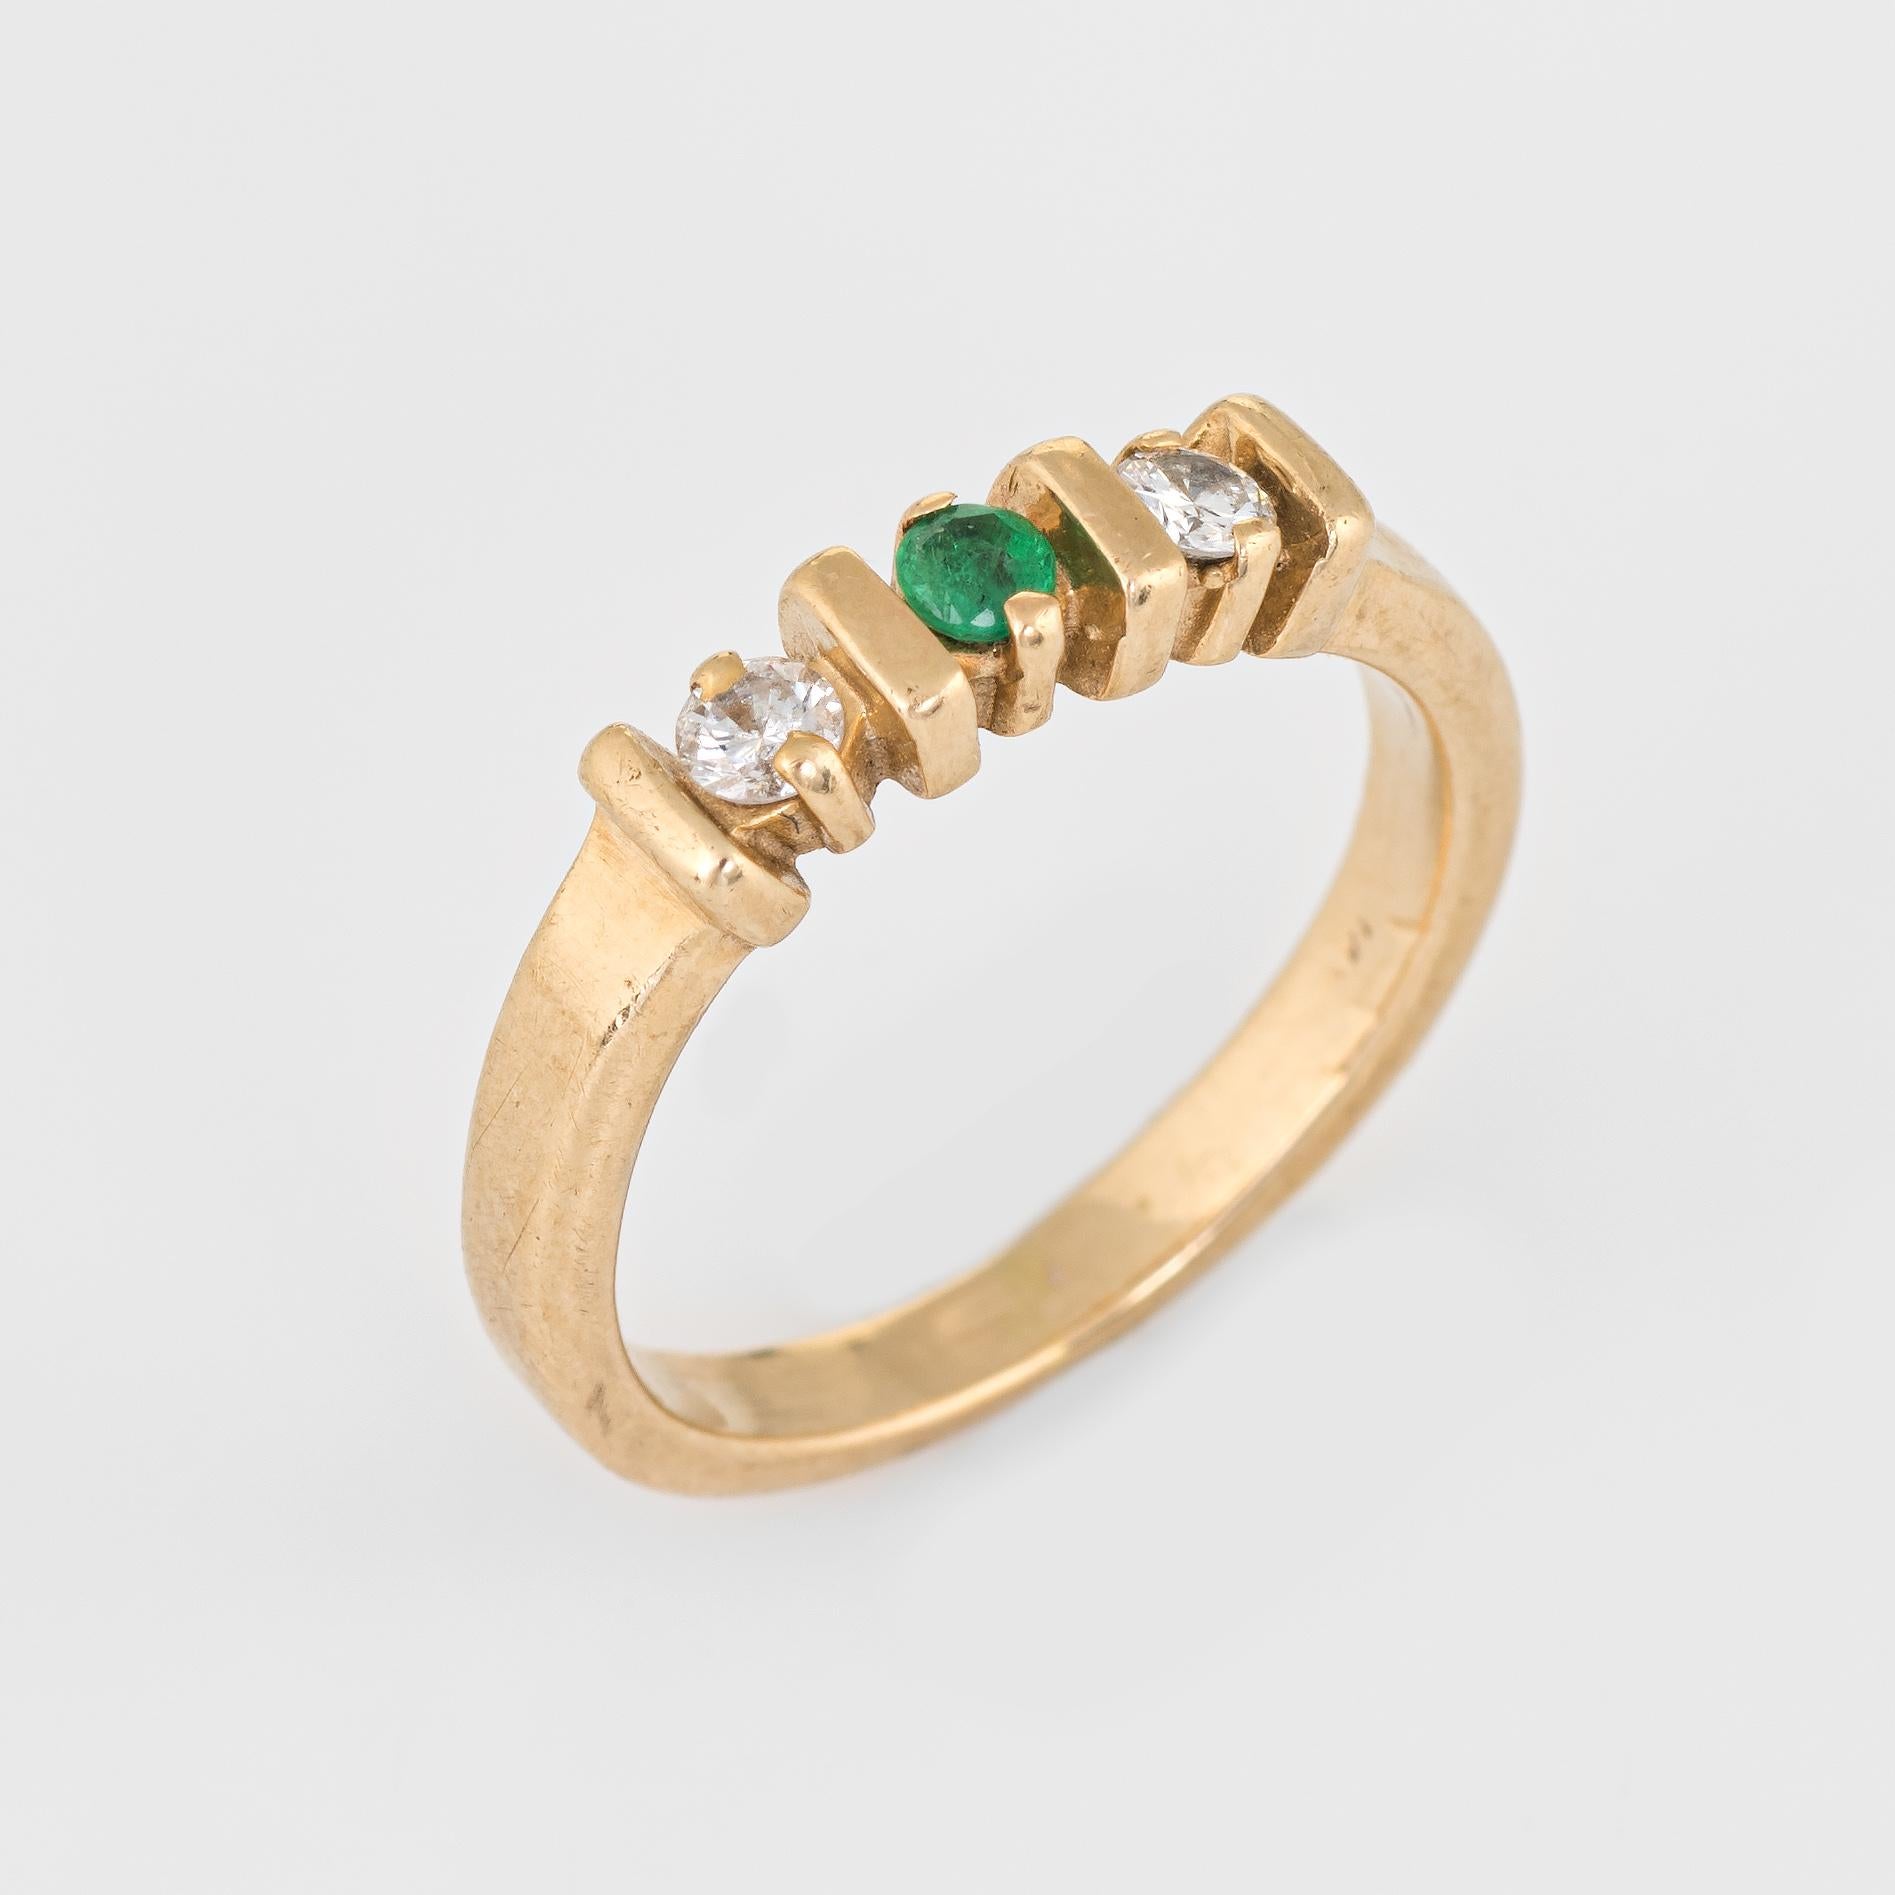 Stylish vintage emerald & diamond band crafted in 14 karat yellow gold. 

Centrally mounted emerald is estimated at 0.05 carats, accented with two estimated 0.05 carat diamonds. The total diamond weight is estimated at 0.10 carats (estimated at I